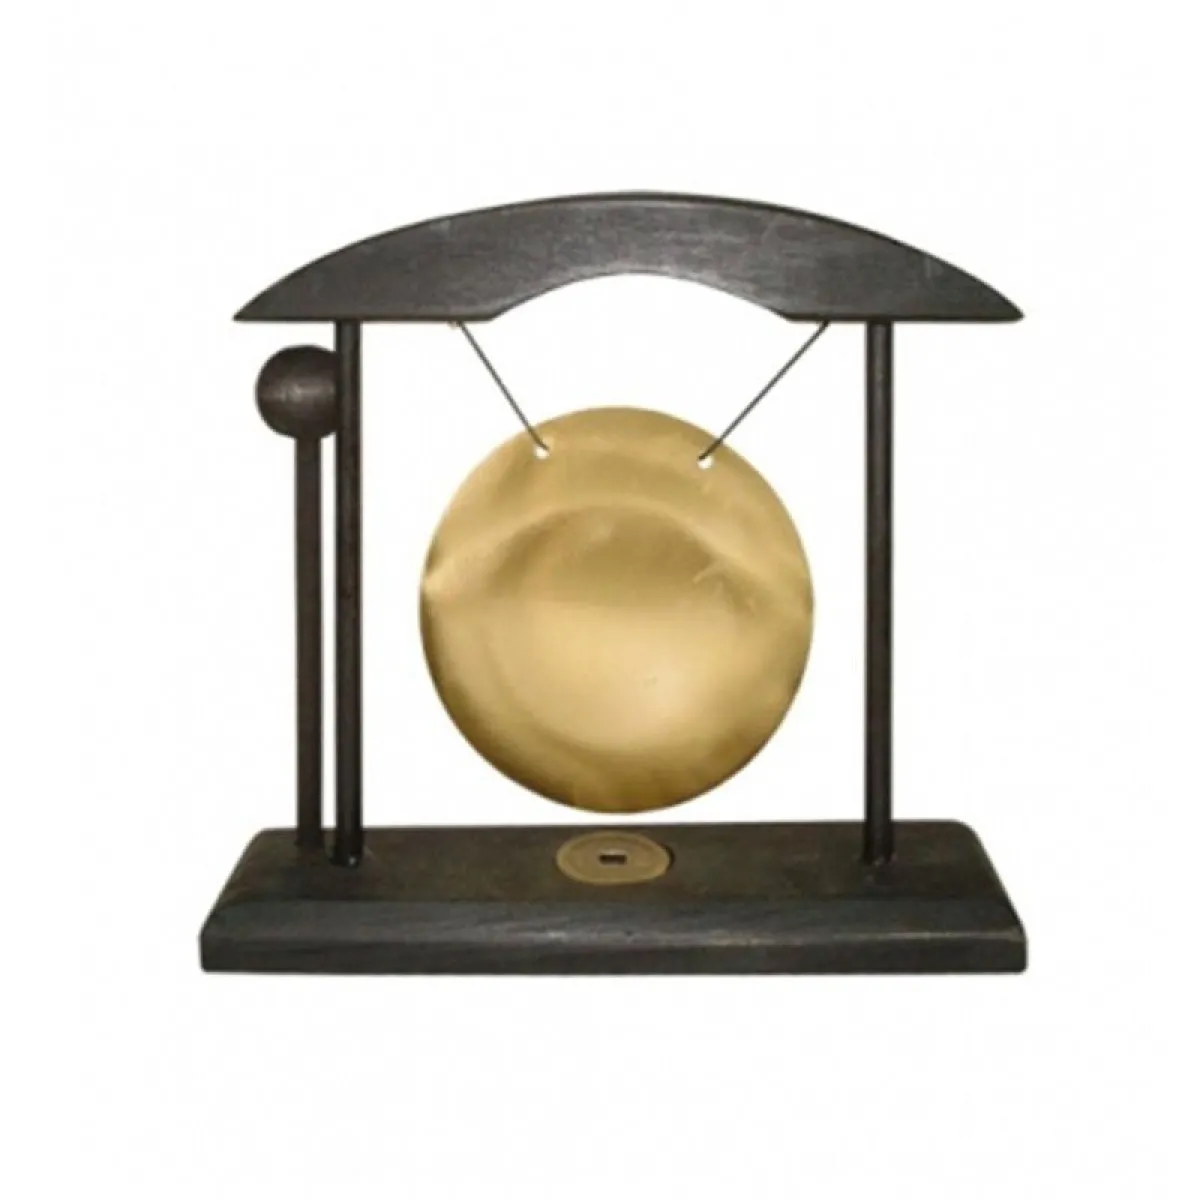 Table gong small black / gold